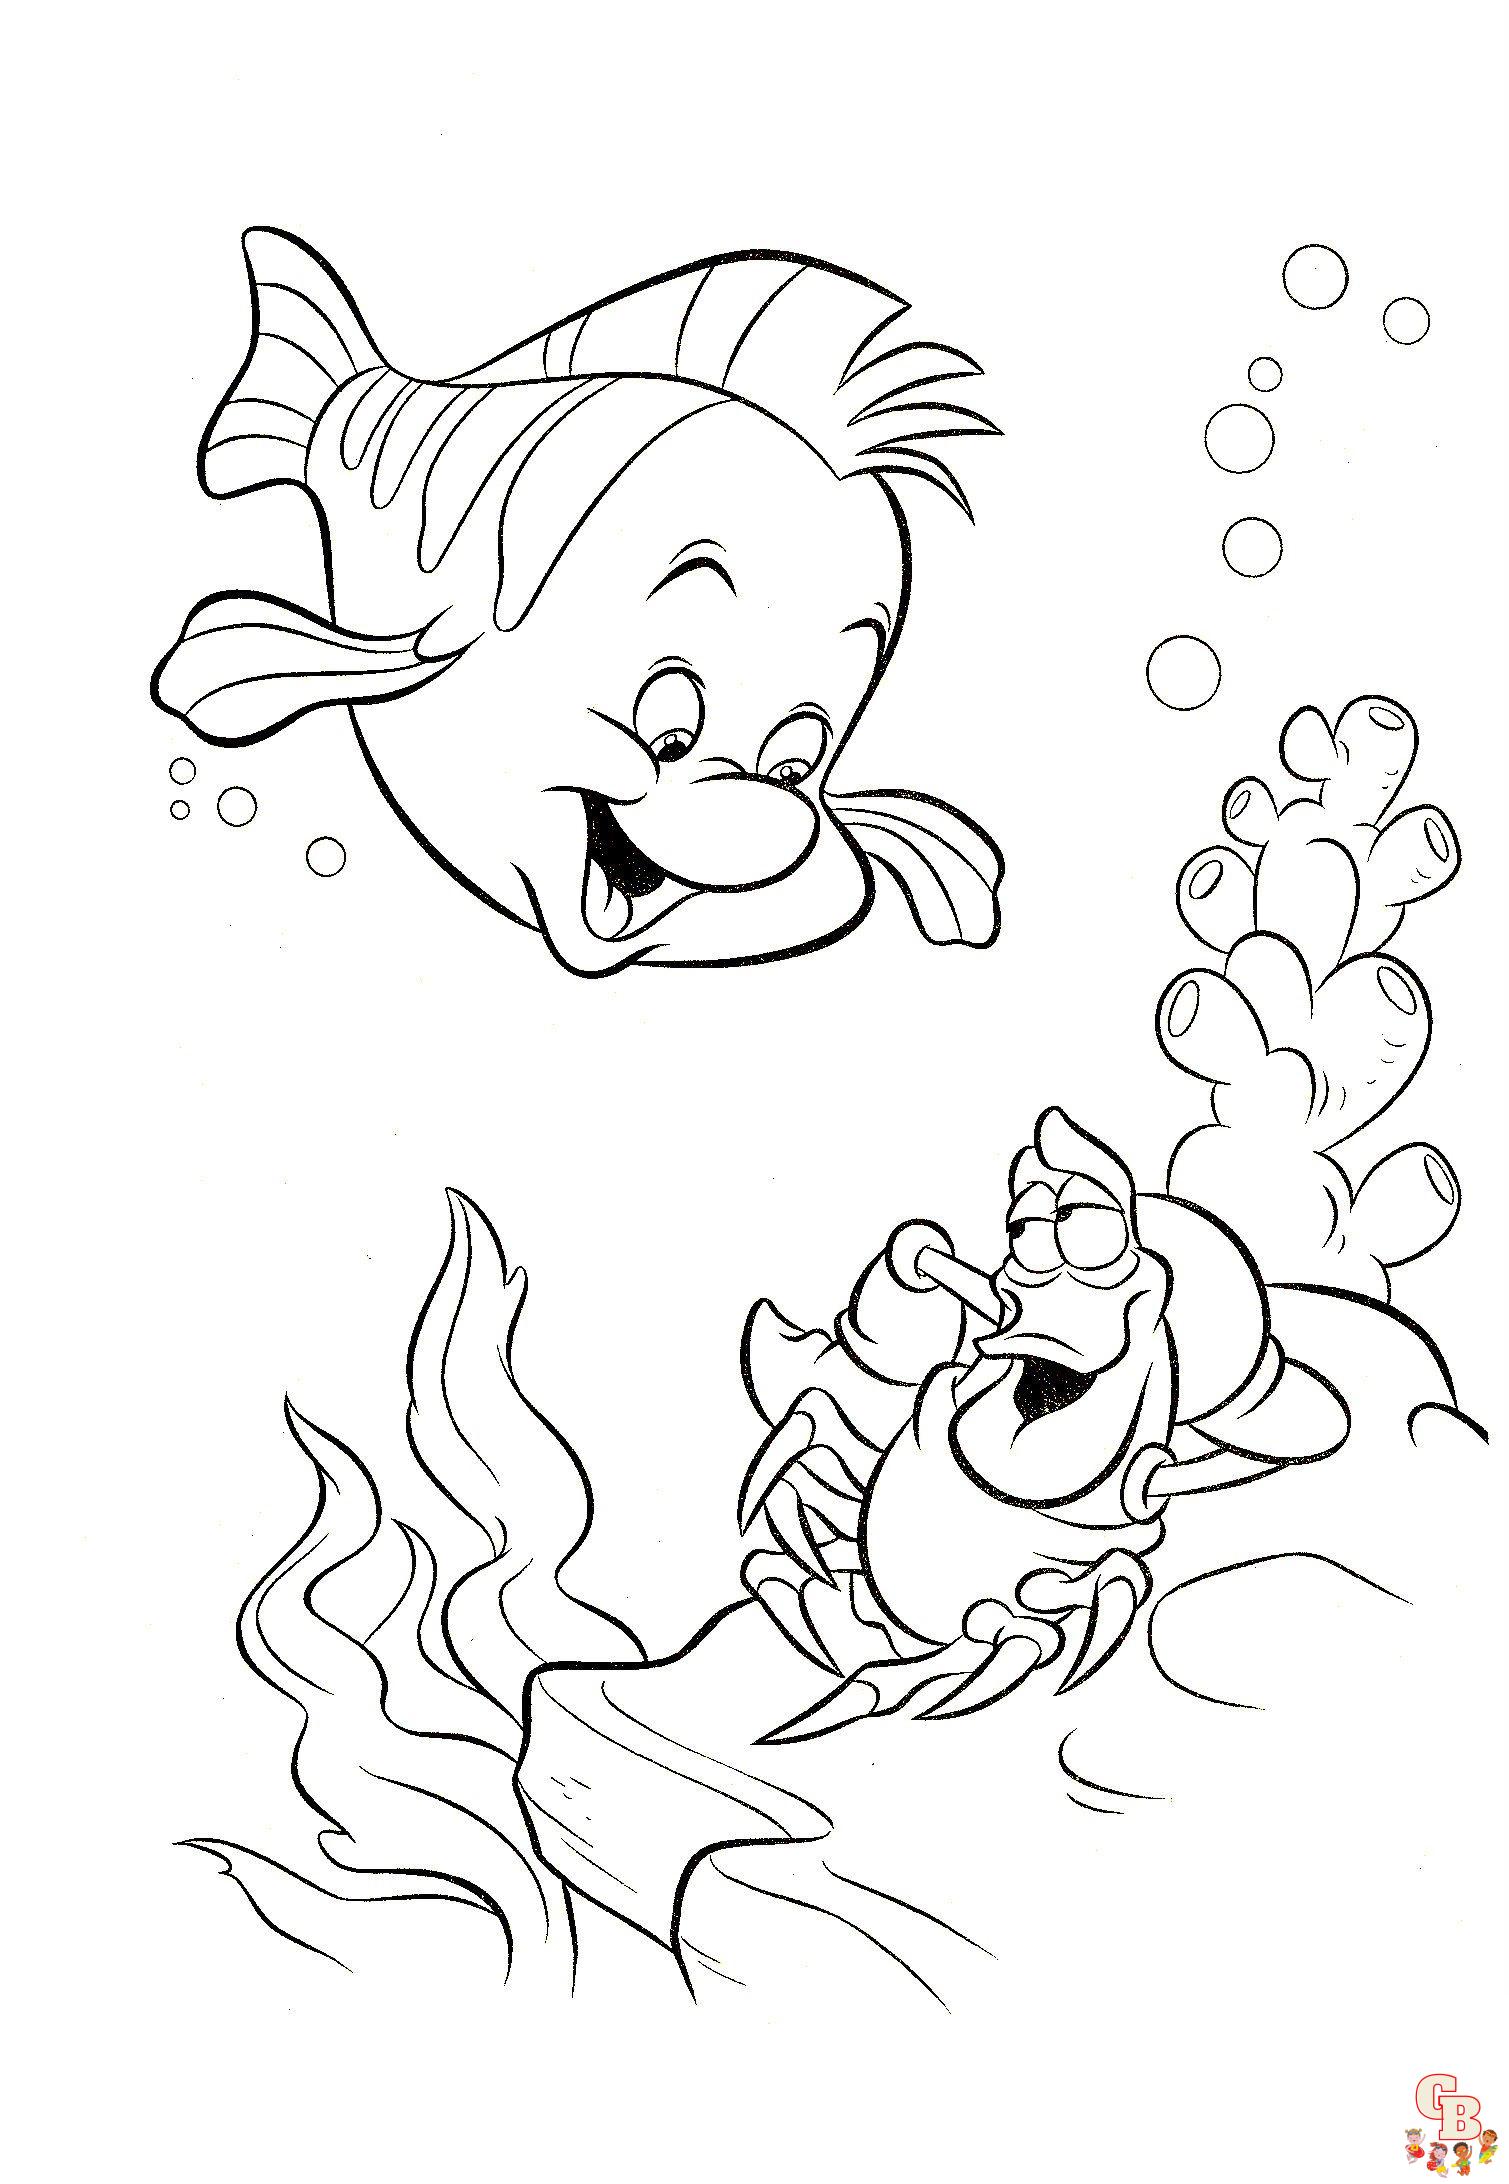 Flounder coloring pages to print